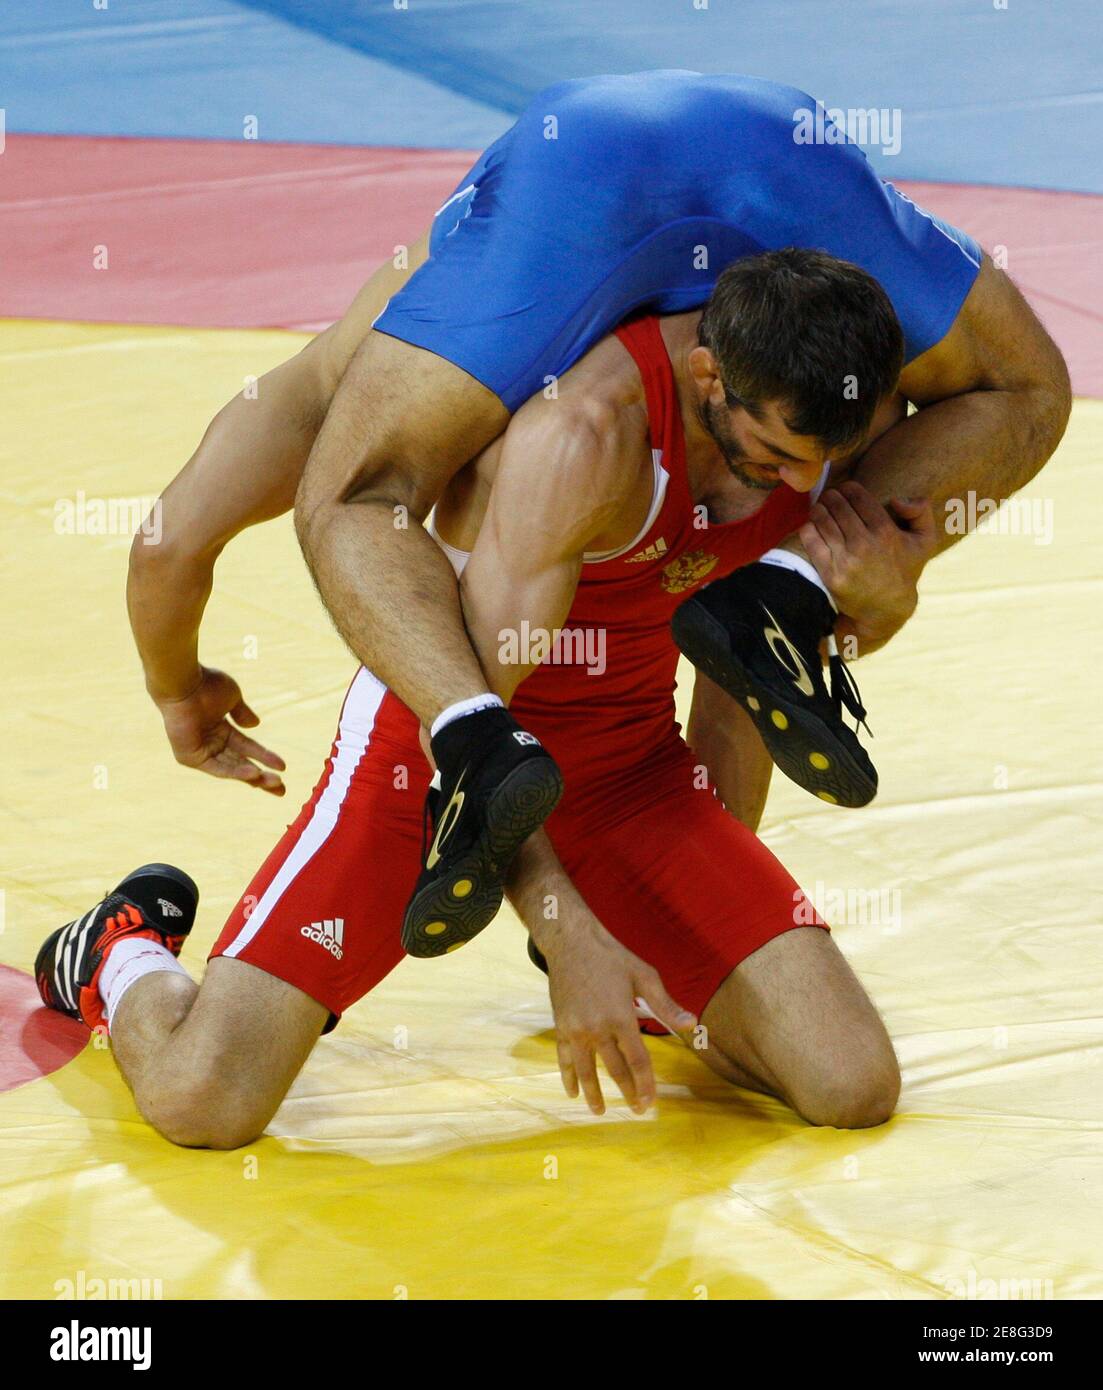 Buvaysa Saytiev of Russia (in red) fights Cho Byung-Kwan of South Korea during their 74kg men's freestyle wrestling qualification match at the Beijing 2008 Olympic Games August 20, 2008. REUTERS/Oleg Popov (CHINA) Stock Photo